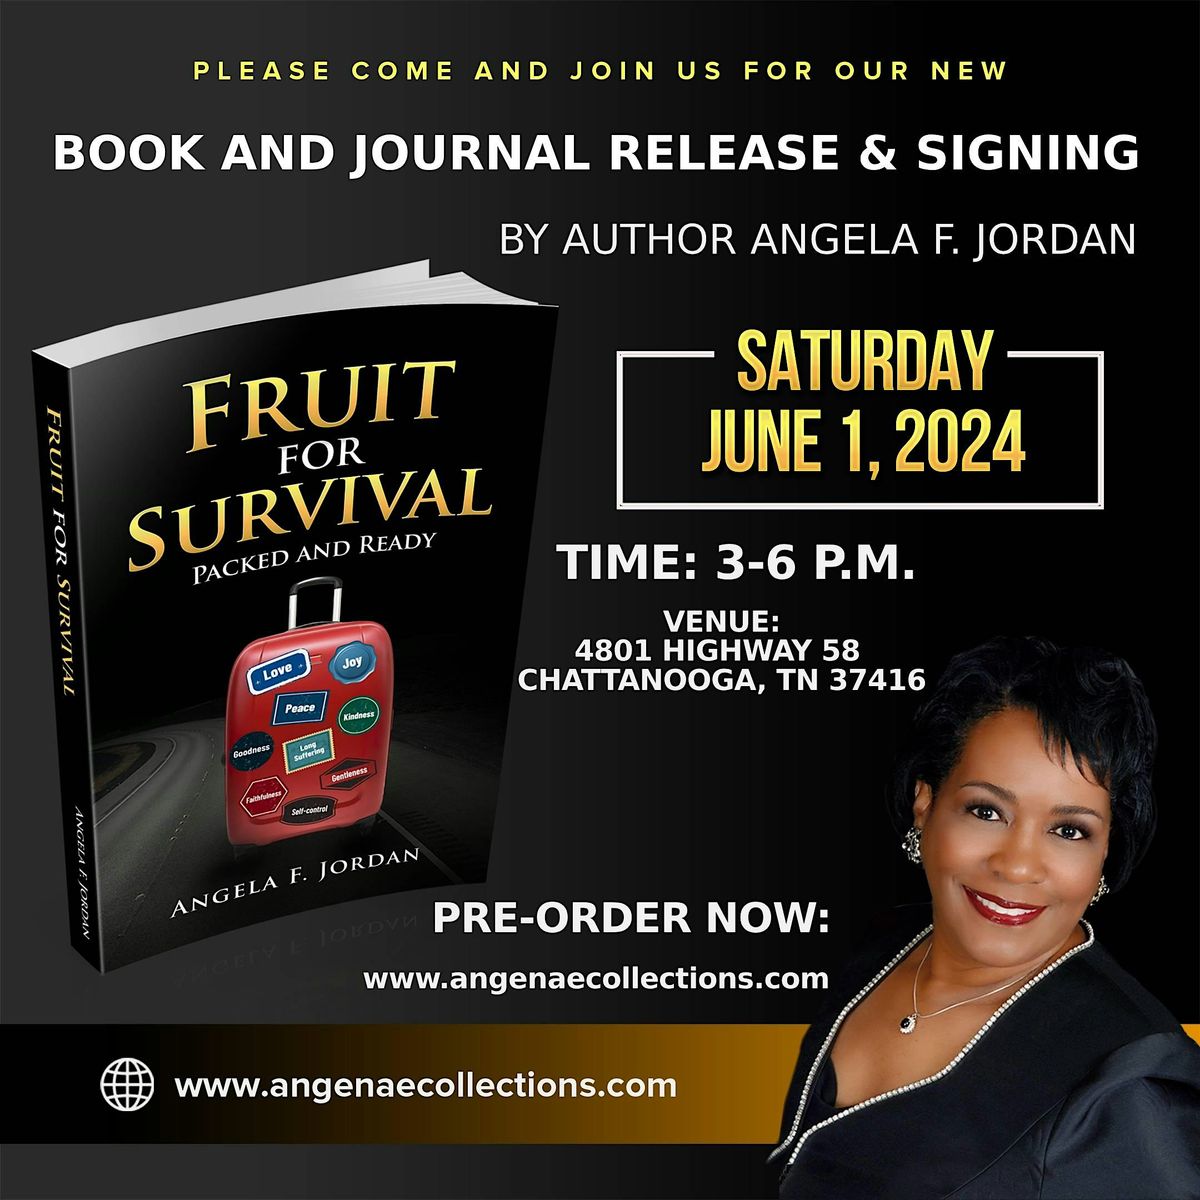 Book and Journal Release & Signing